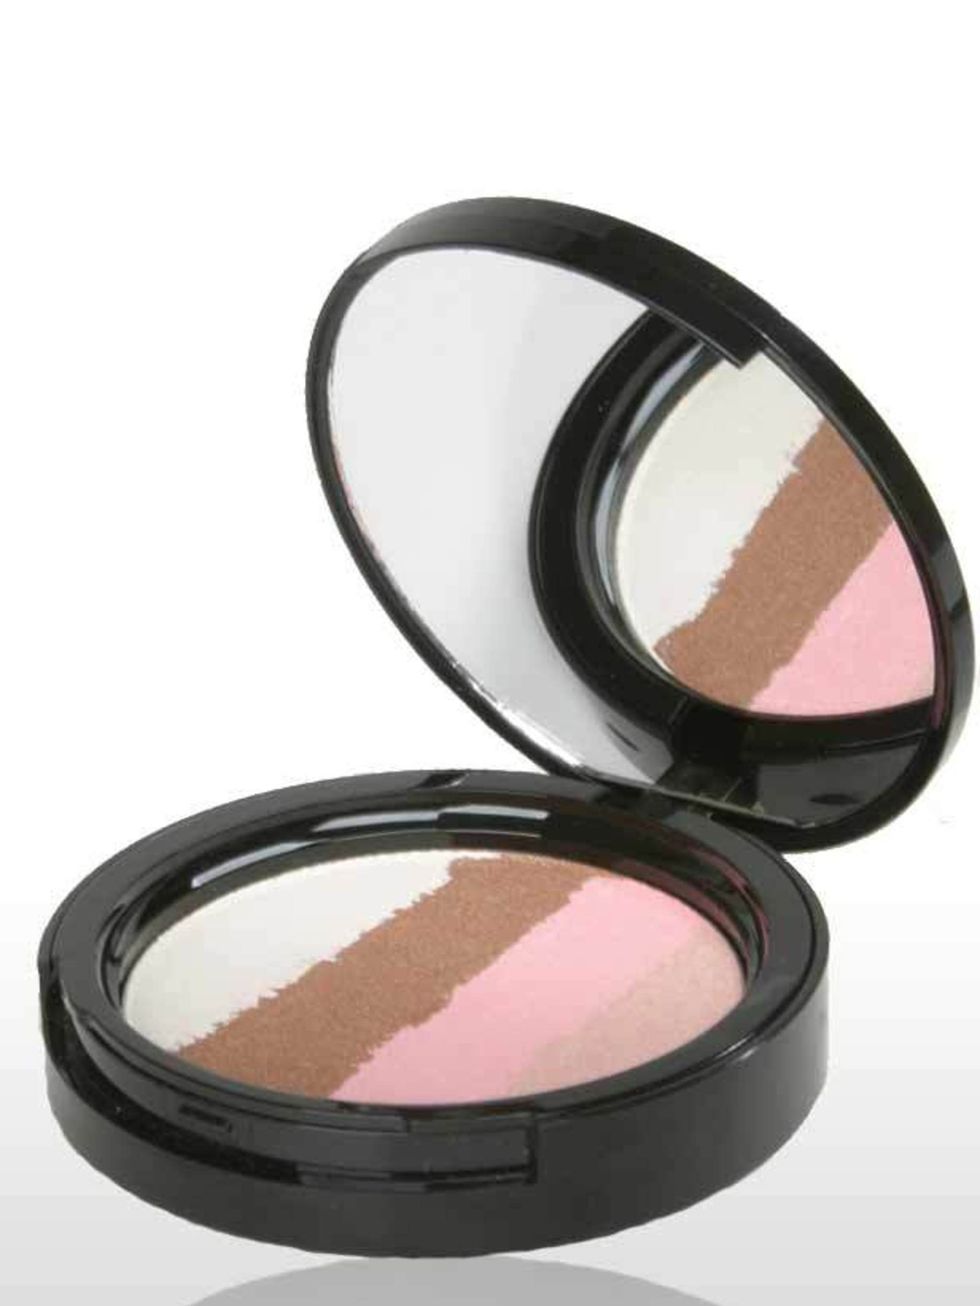 <p>This powder suits every skin tone. Swirl a big bronzing brush across all four shades and sweep over your face for a polished, flattering finish. Alternatively, use a smaller brush on the individual shades to strategically shimmer and shade.</p><p>Carib